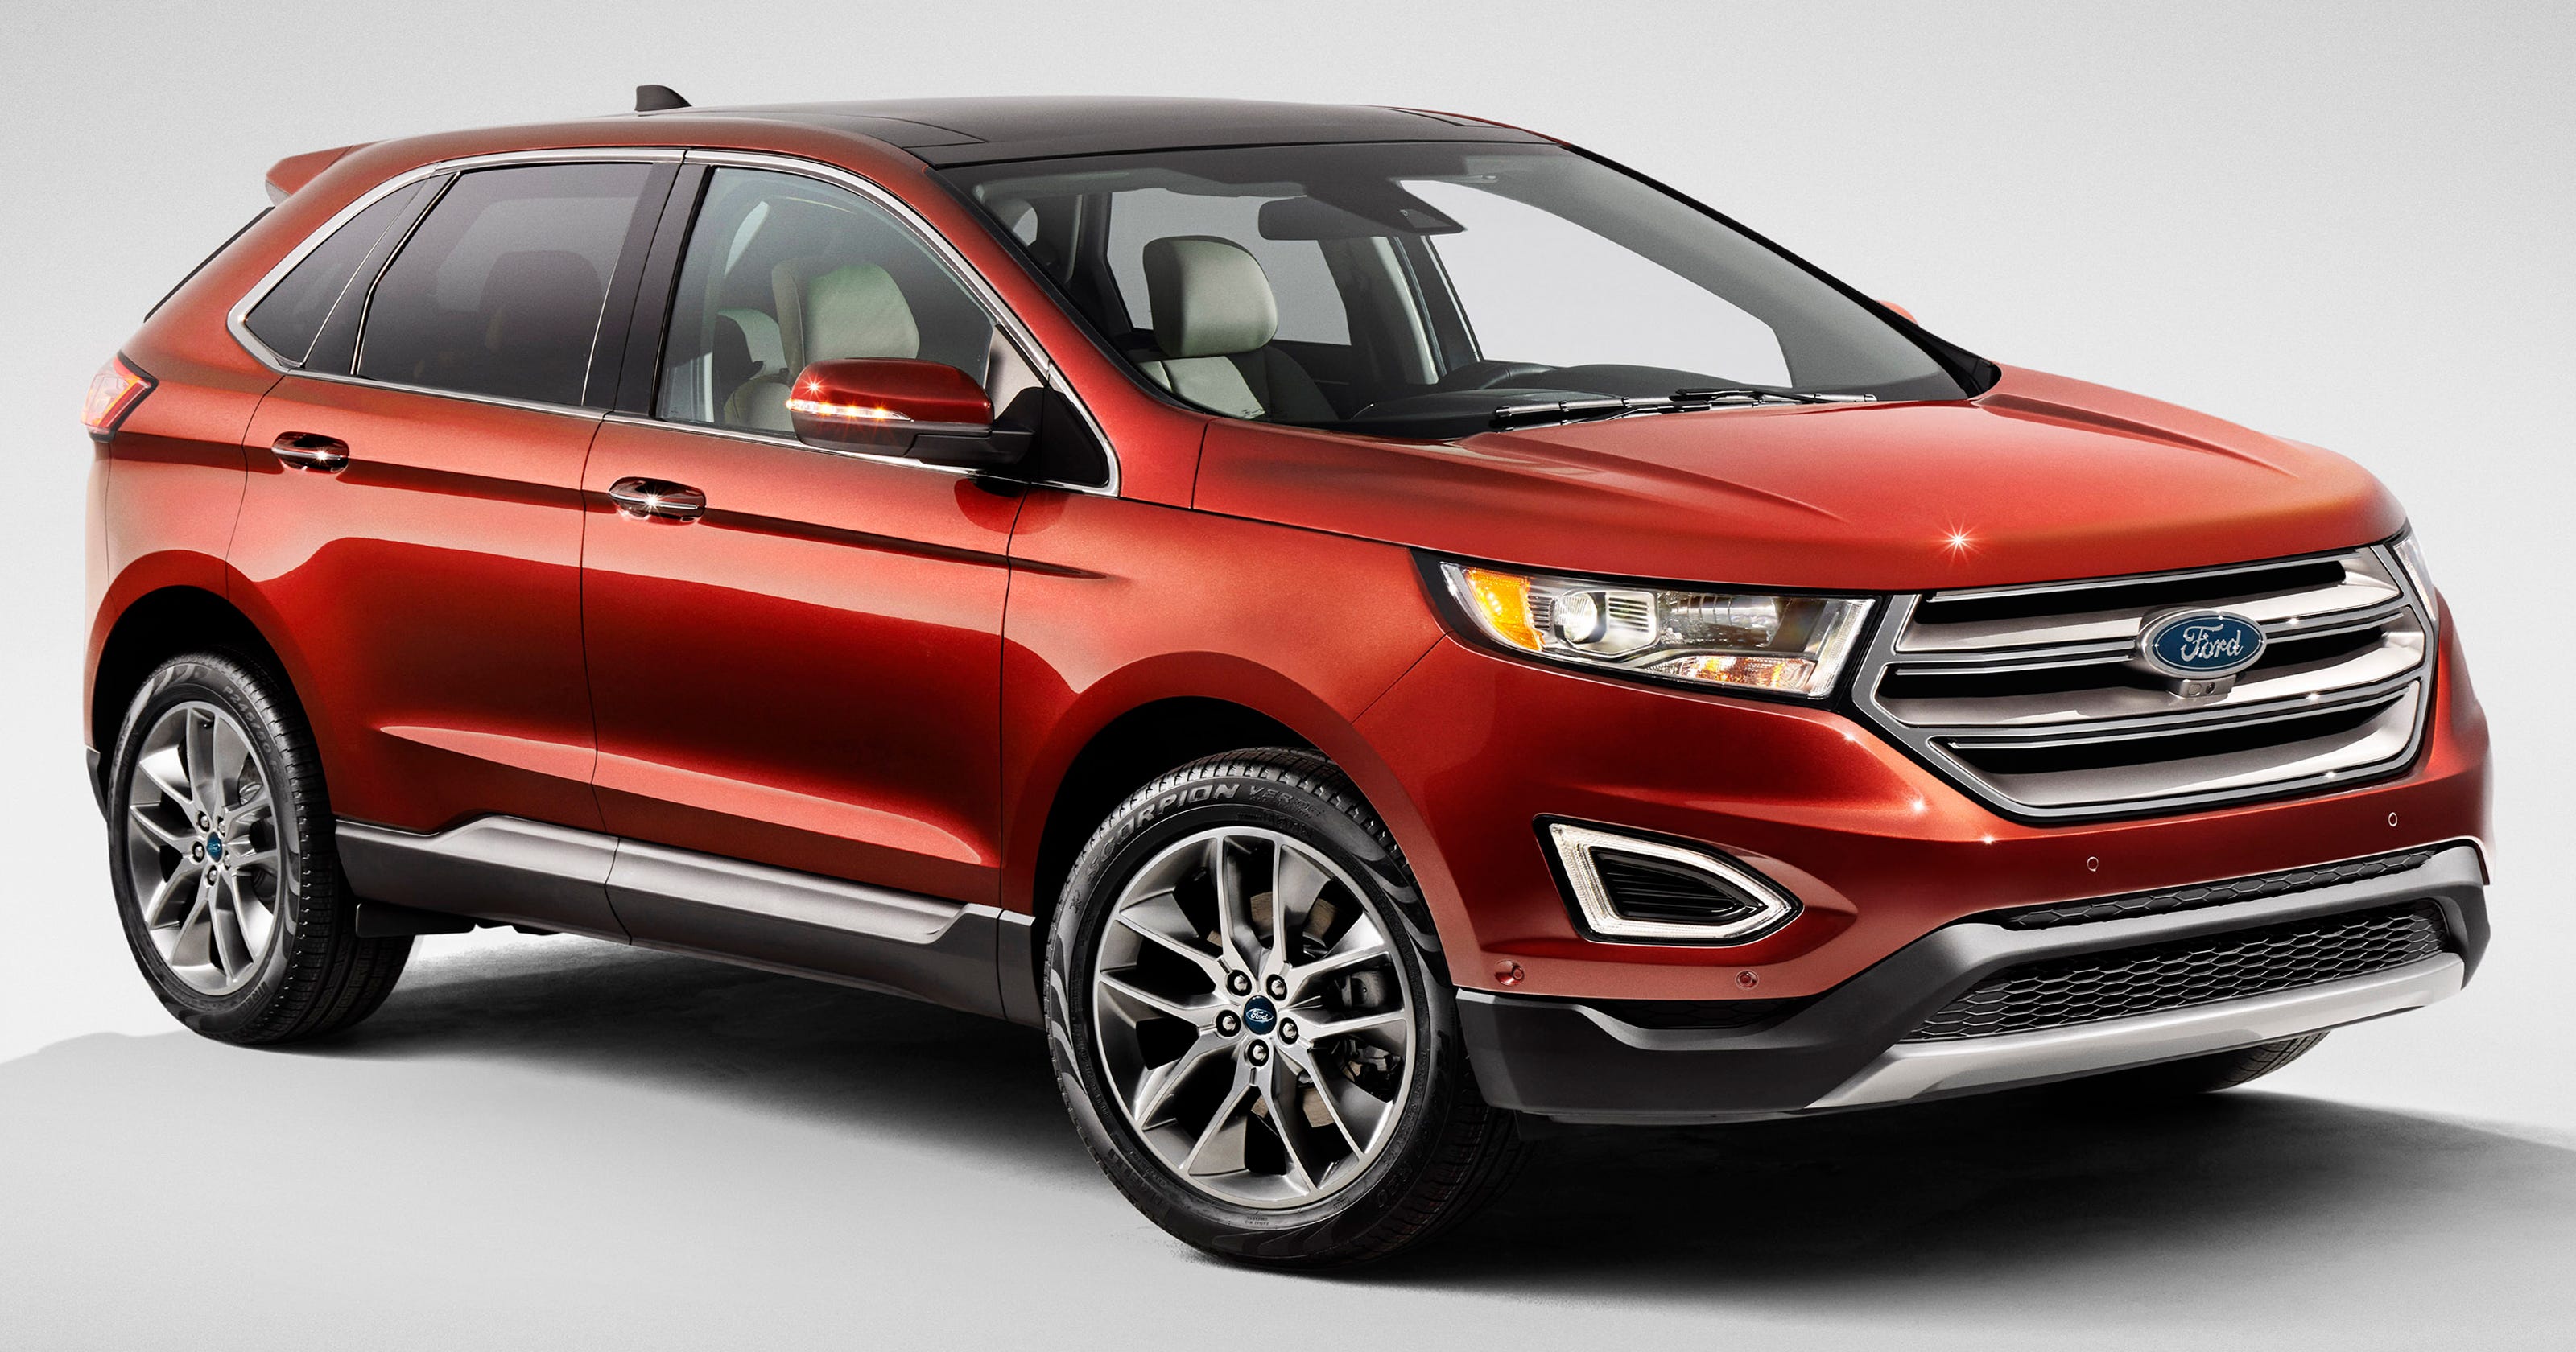 Review: Ford's new Edge SUV has space, power